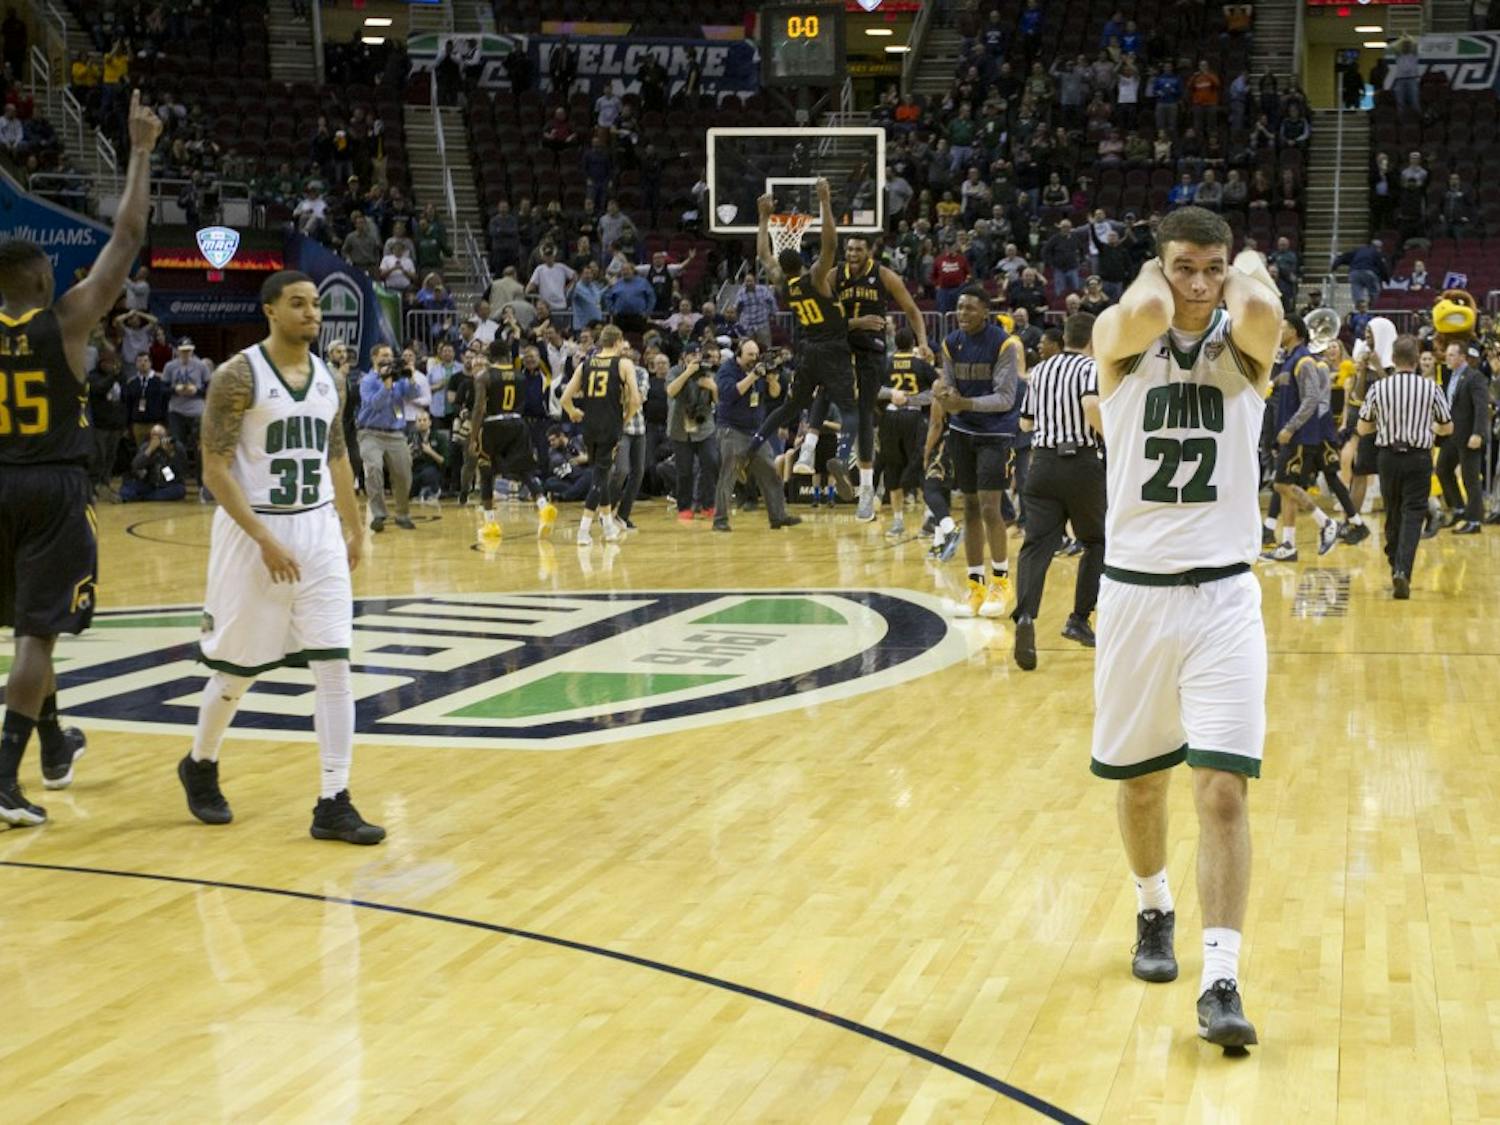 Ohio sophomore forward Gavin Block (#22) and sophomore guard Jordan Dartis (#35) walk off the court after losing to Kent State 68-66 in the MAC Tournament semifinals on Friday, March 10, 2017.